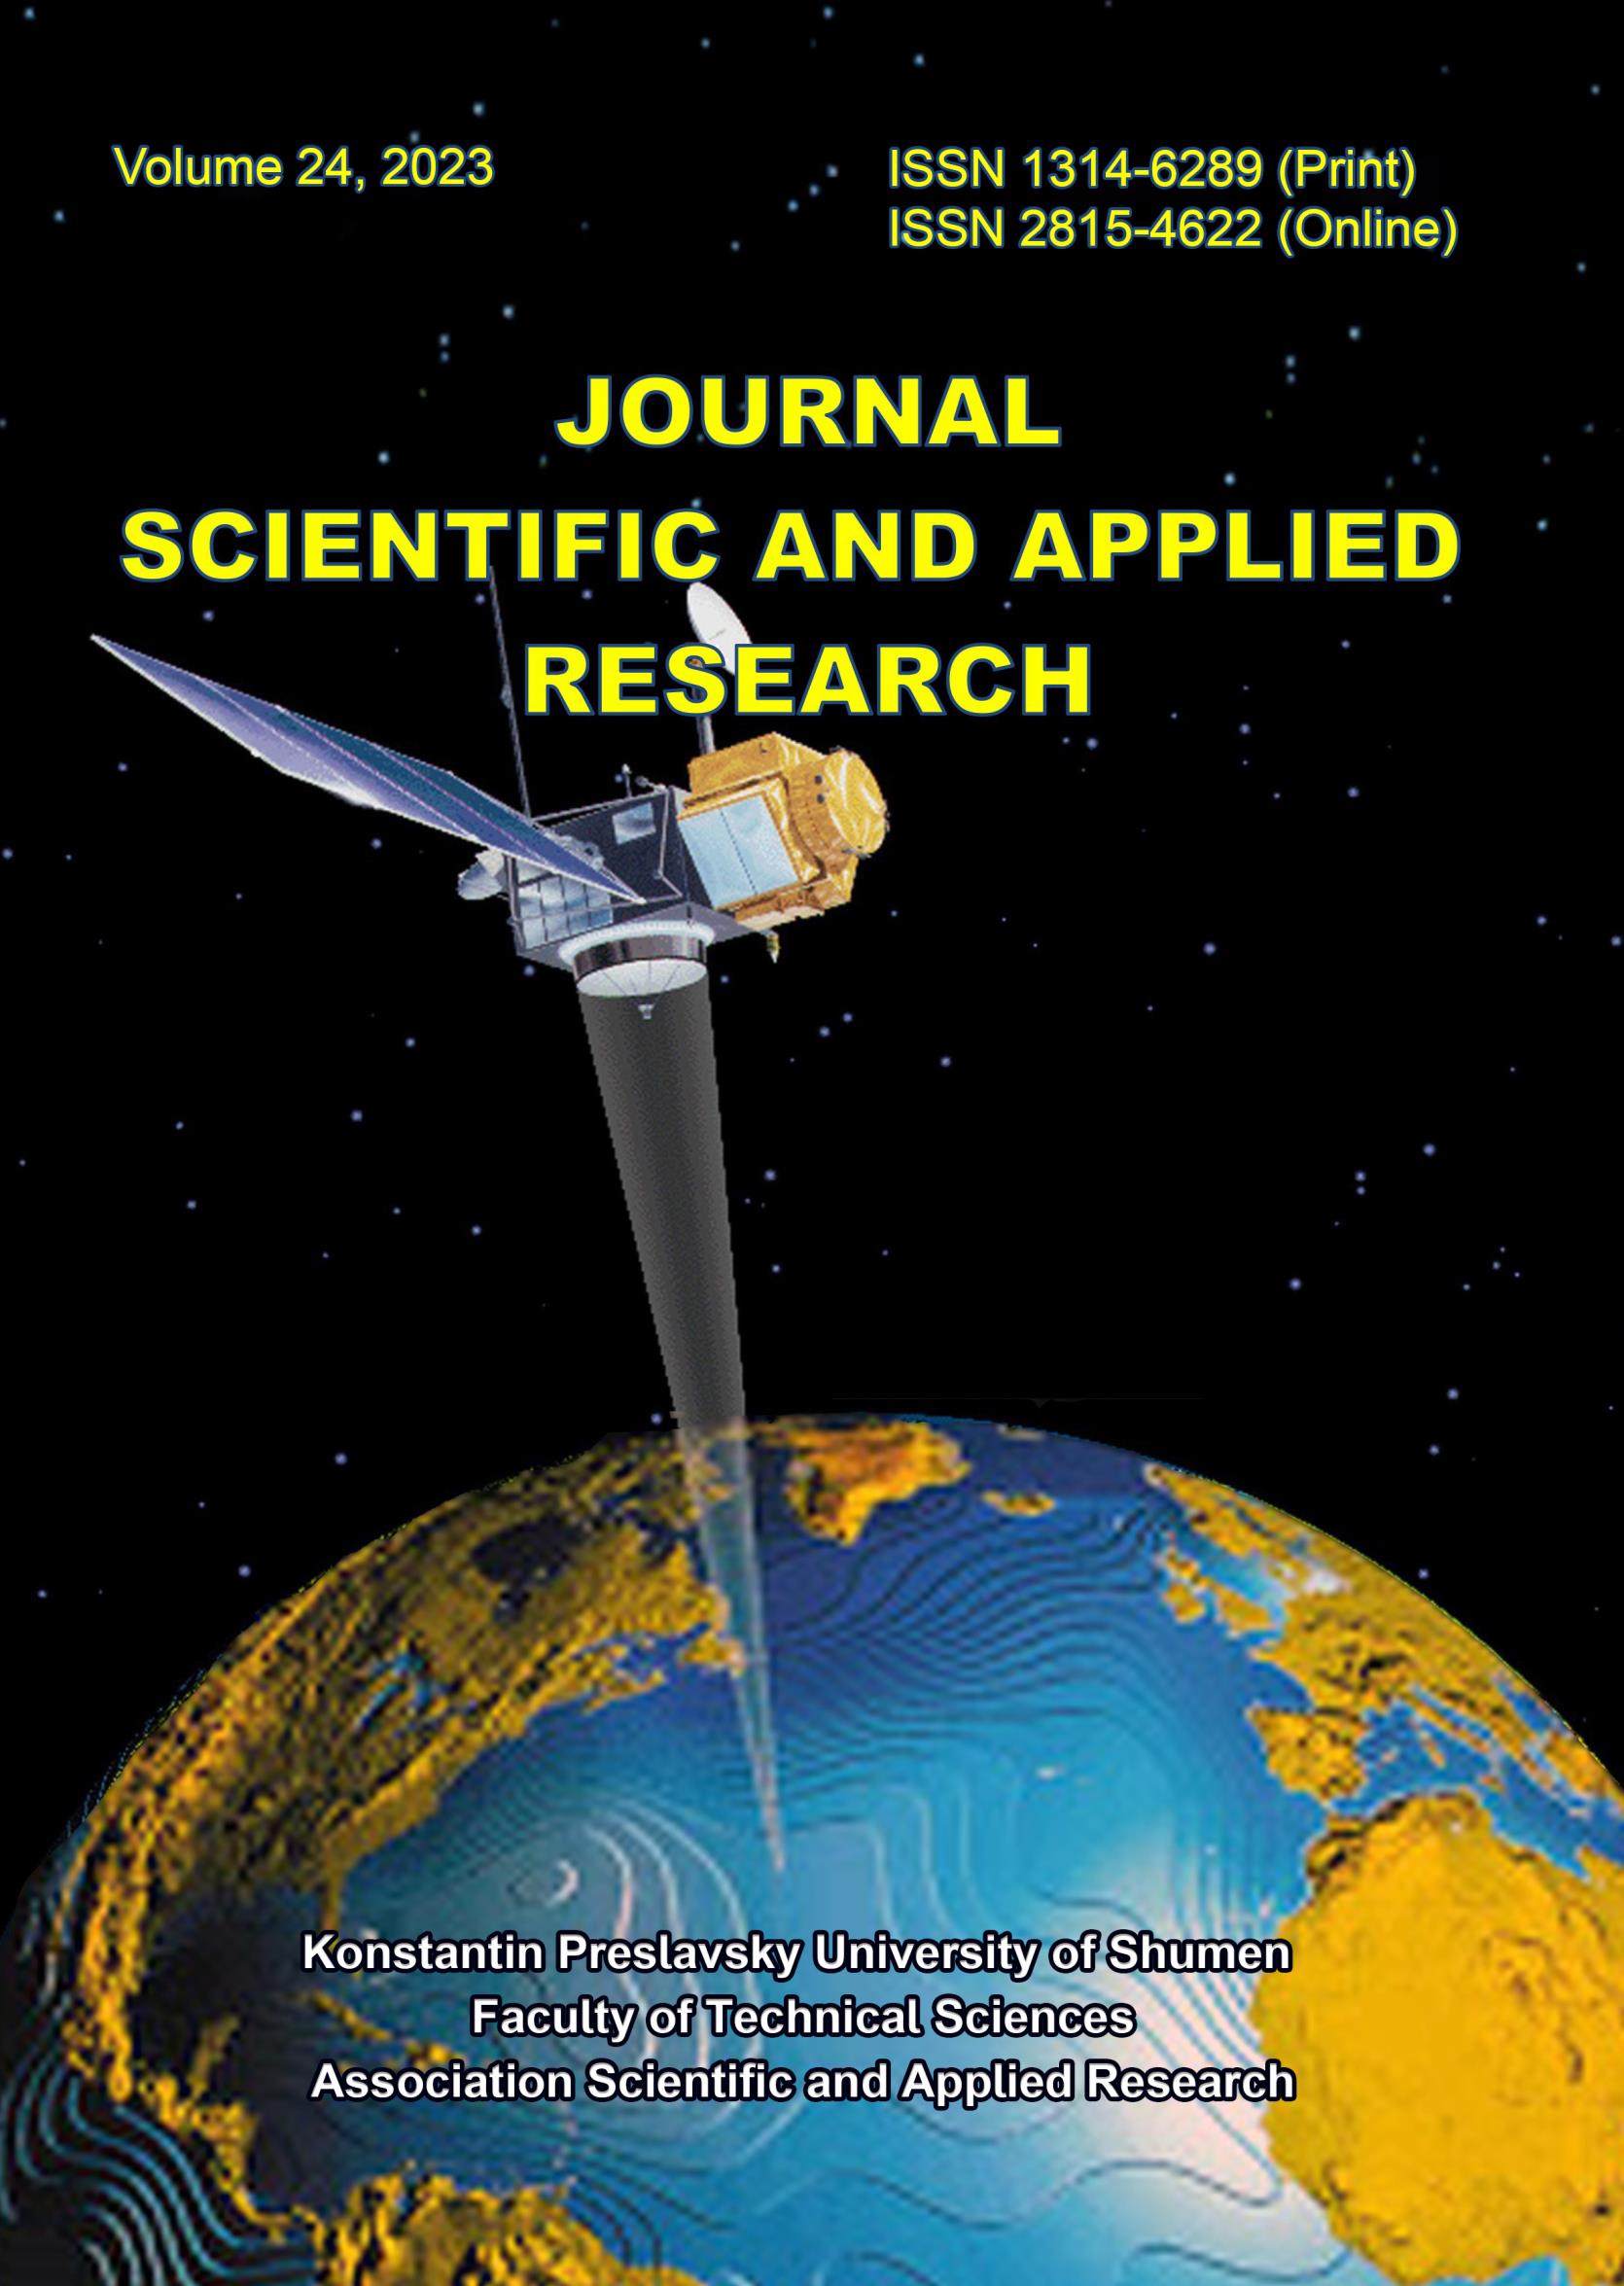 					View Vol. 24 No. 1 (2023): Journal Scientific and Applied Research
				